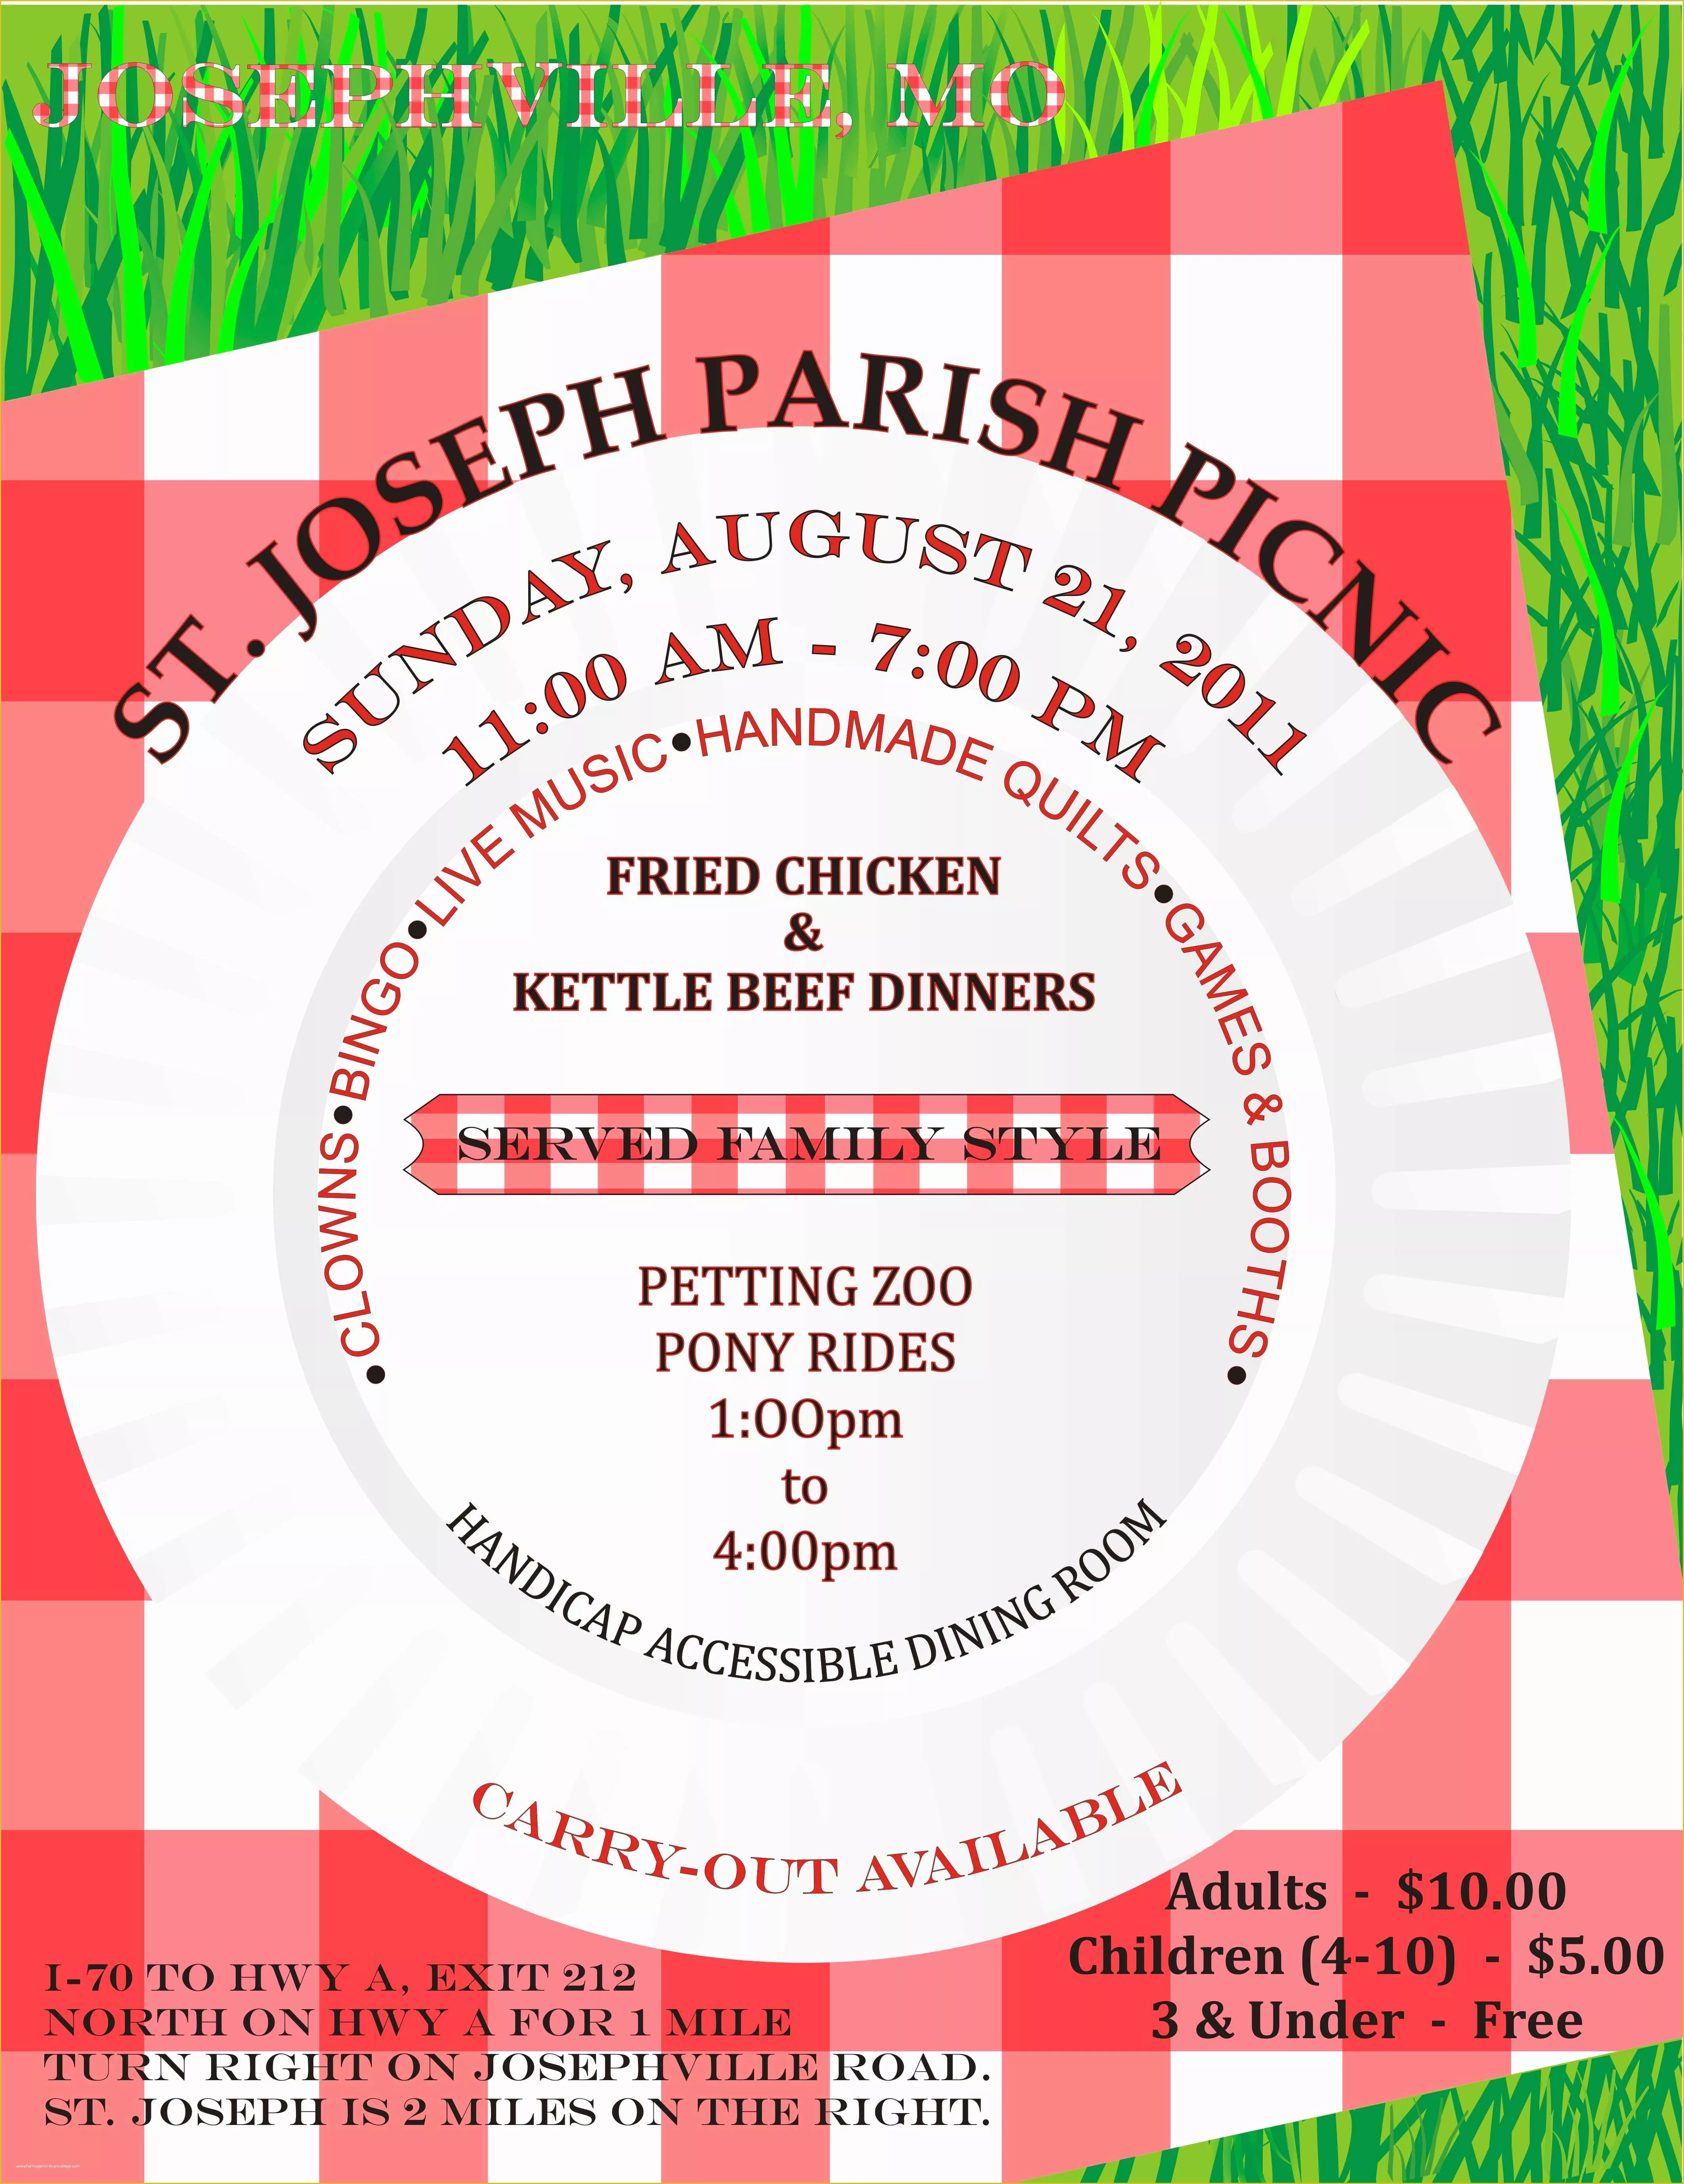 Free Church Picnic Flyer Templates Of 8 Best Of Picnic Borders for Flyers Church Picnic